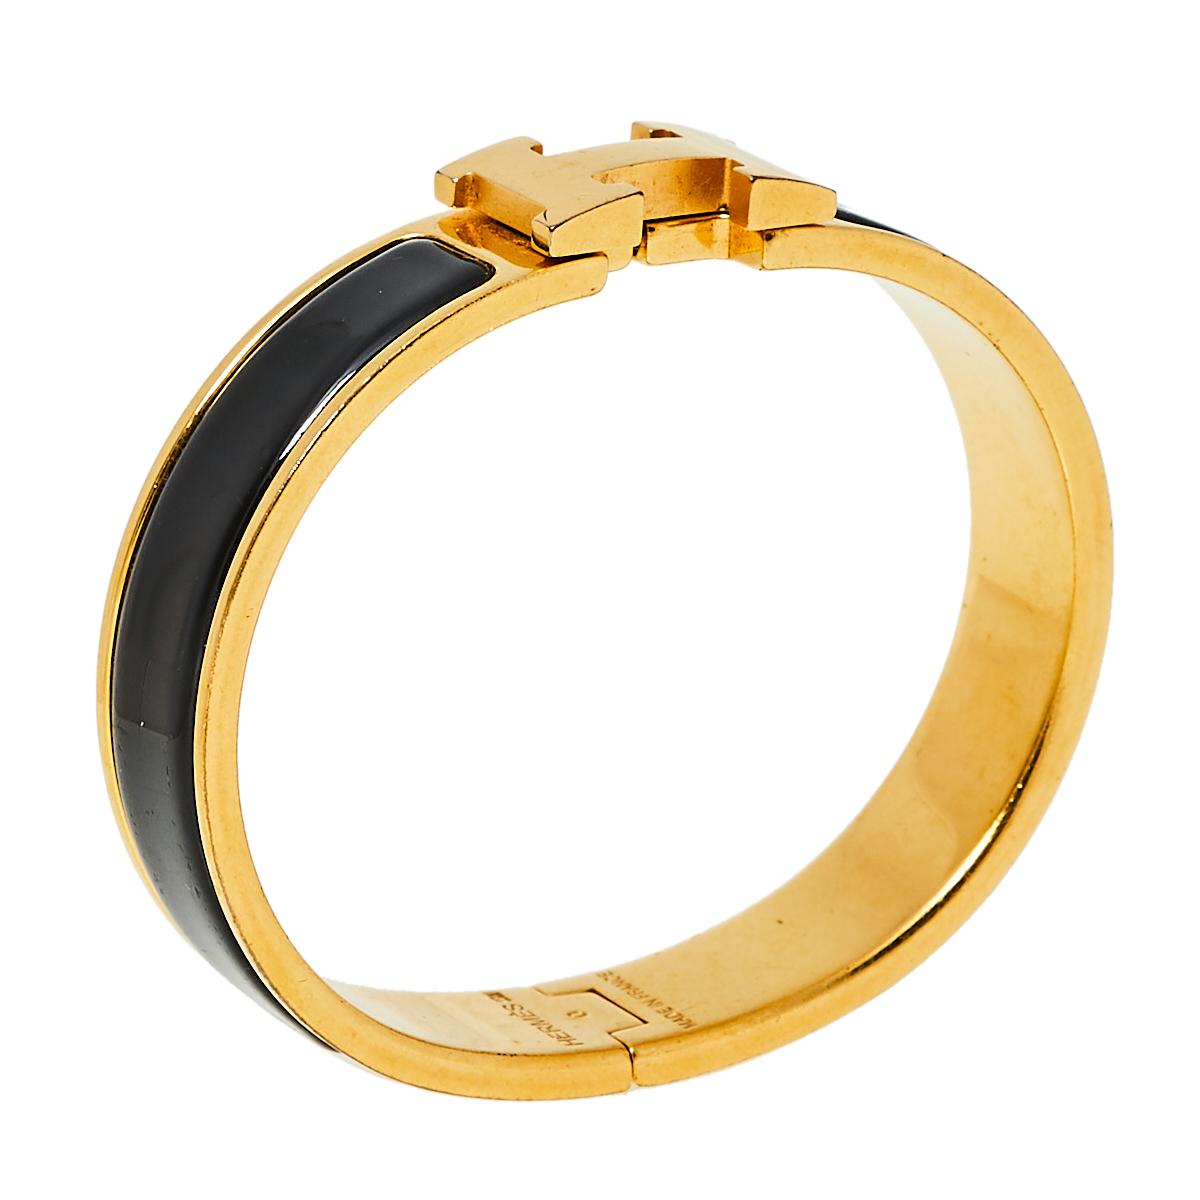 This Clic H bracelet embodies Hermès’ elegant craftsmanship with its gold-plated metal body and black enamel inlay. Featuring the iconic H logo of the fashion house at the front, this bracelet is the accessory to buy today!

